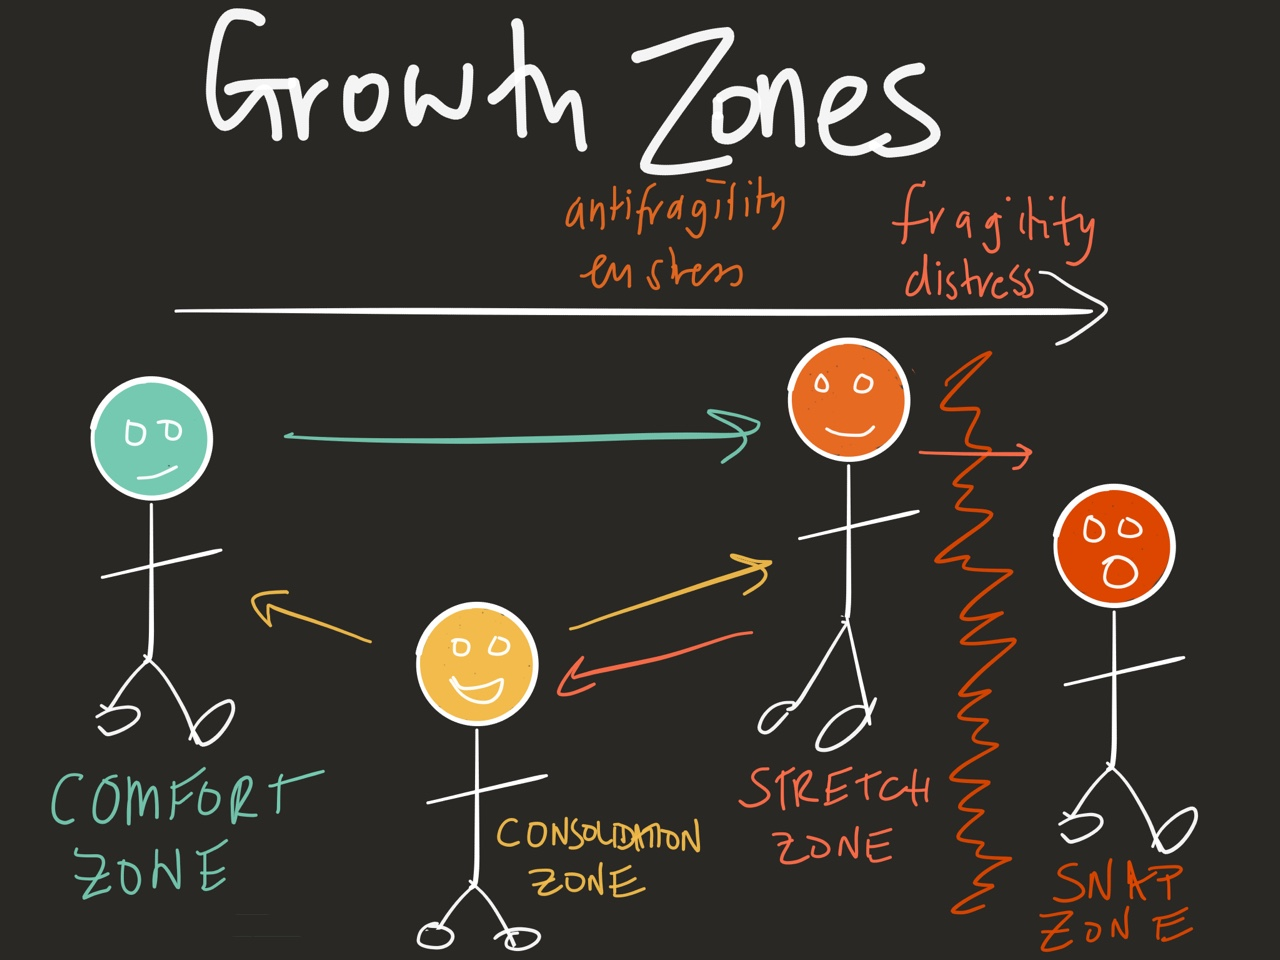 Why comfort zone and stretching zone can be (almost) one - Ute's